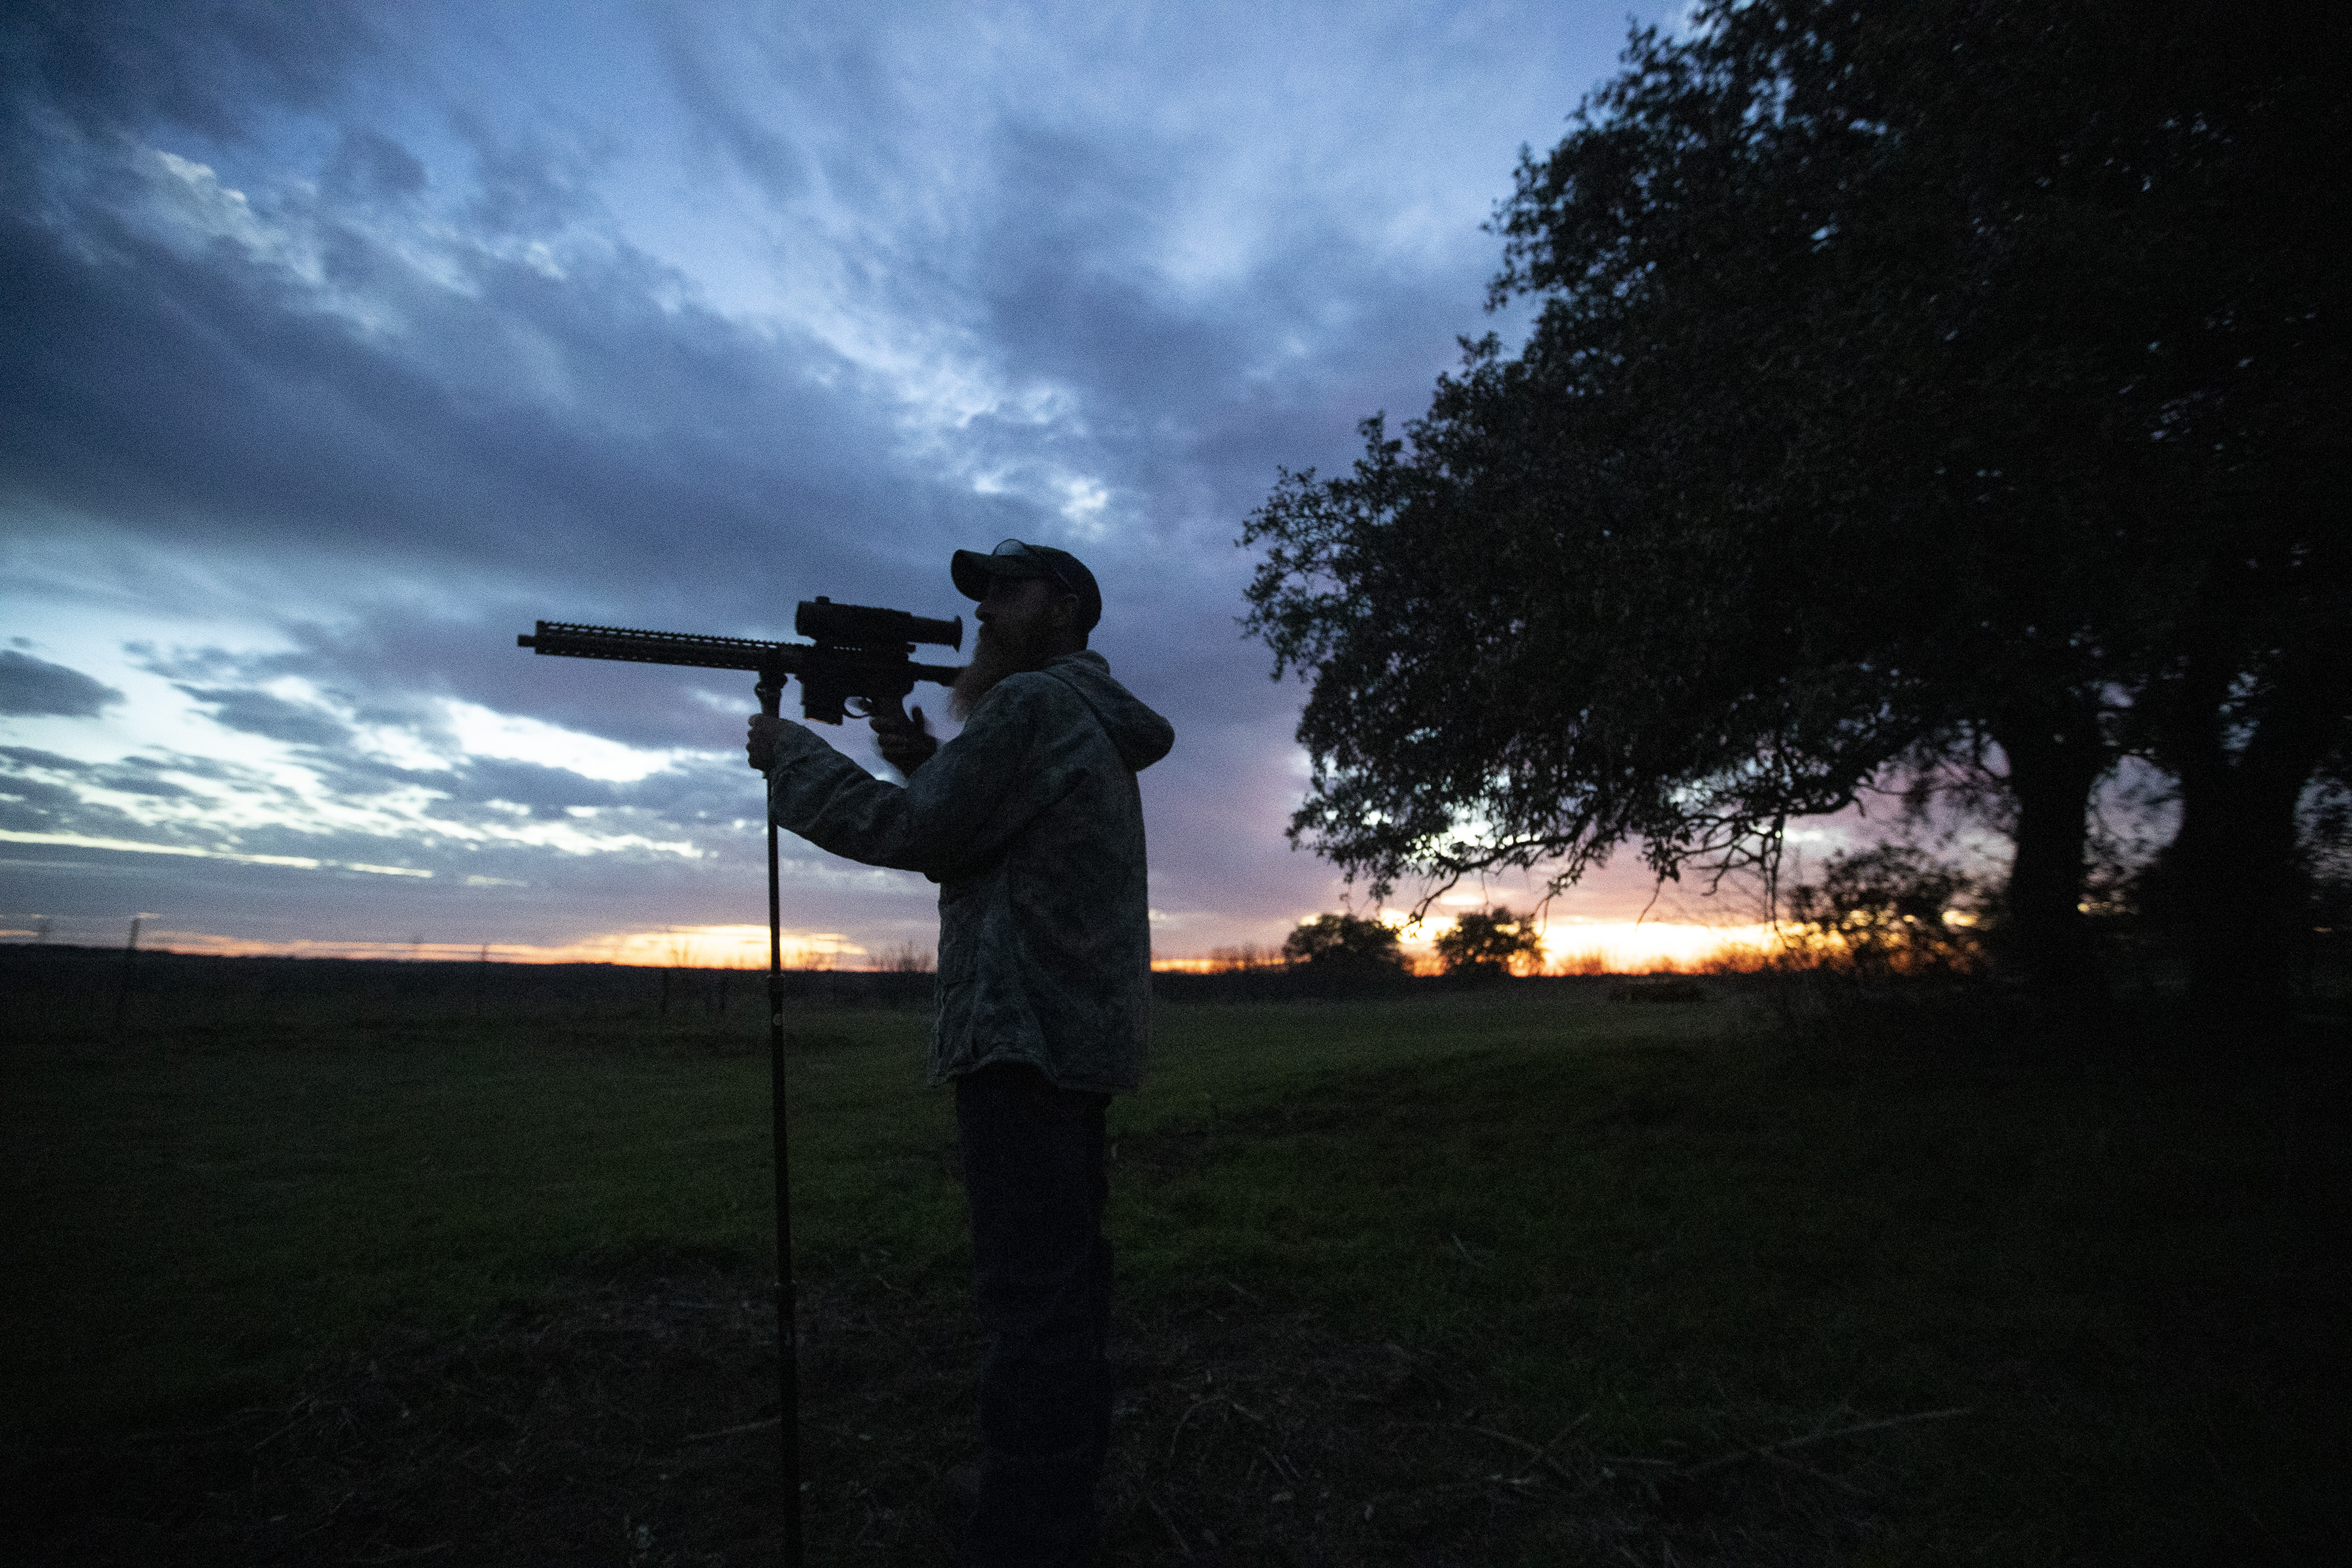 A man peers through the scope on his rifle in rural Texas.